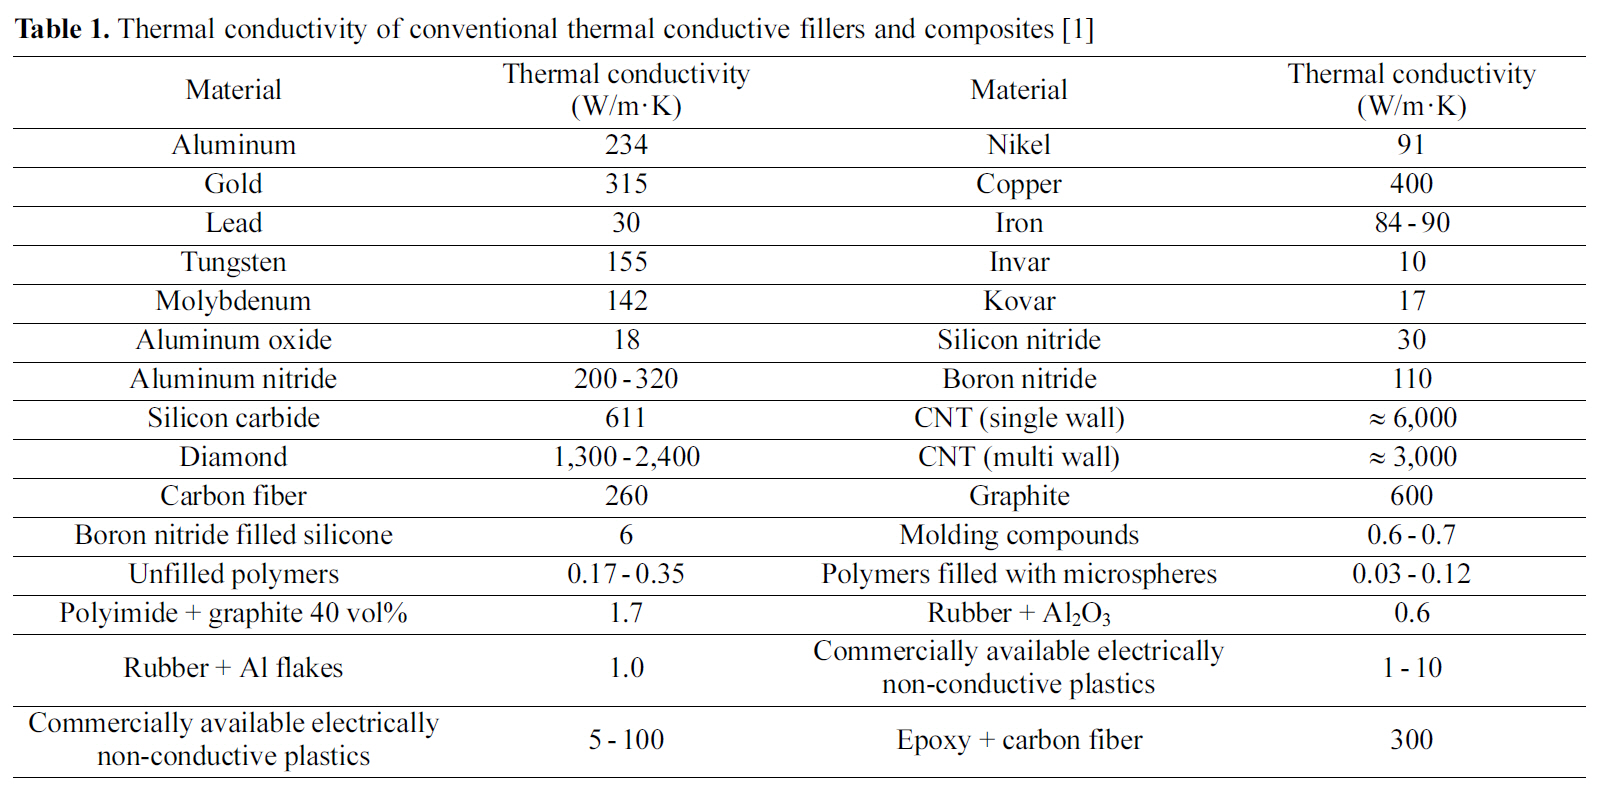 Thermal conductivity of conventional thermal conductive fillers and composites [1]